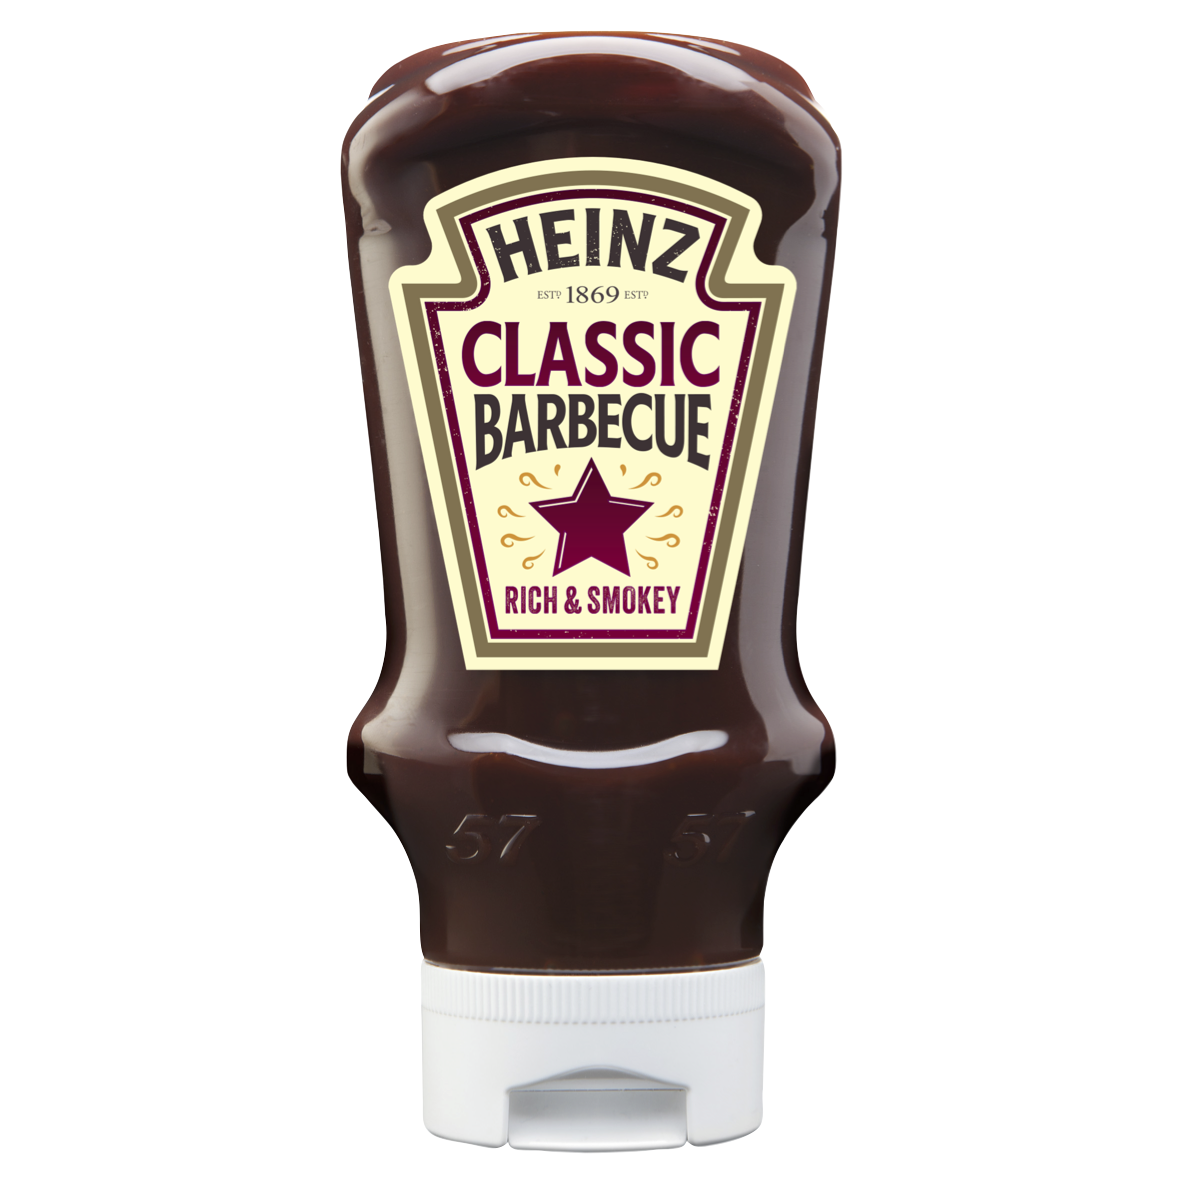 Photograph of 1 x 480g Heinz Classic BBQ product